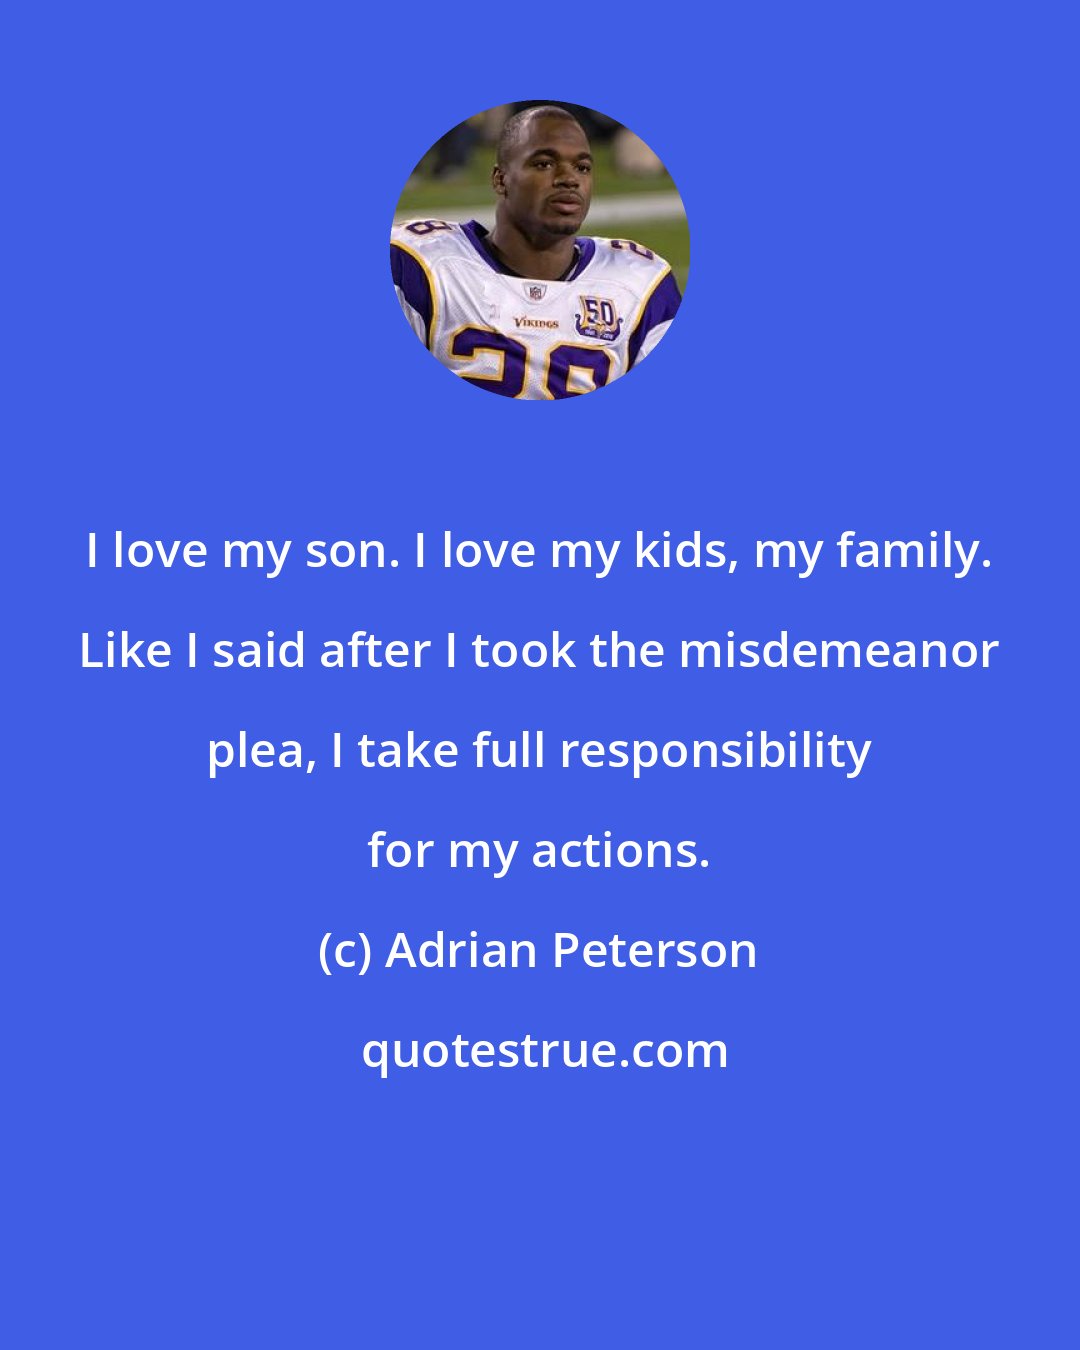 Adrian Peterson: I love my son. I love my kids, my family. Like I said after I took the misdemeanor plea, I take full responsibility for my actions.